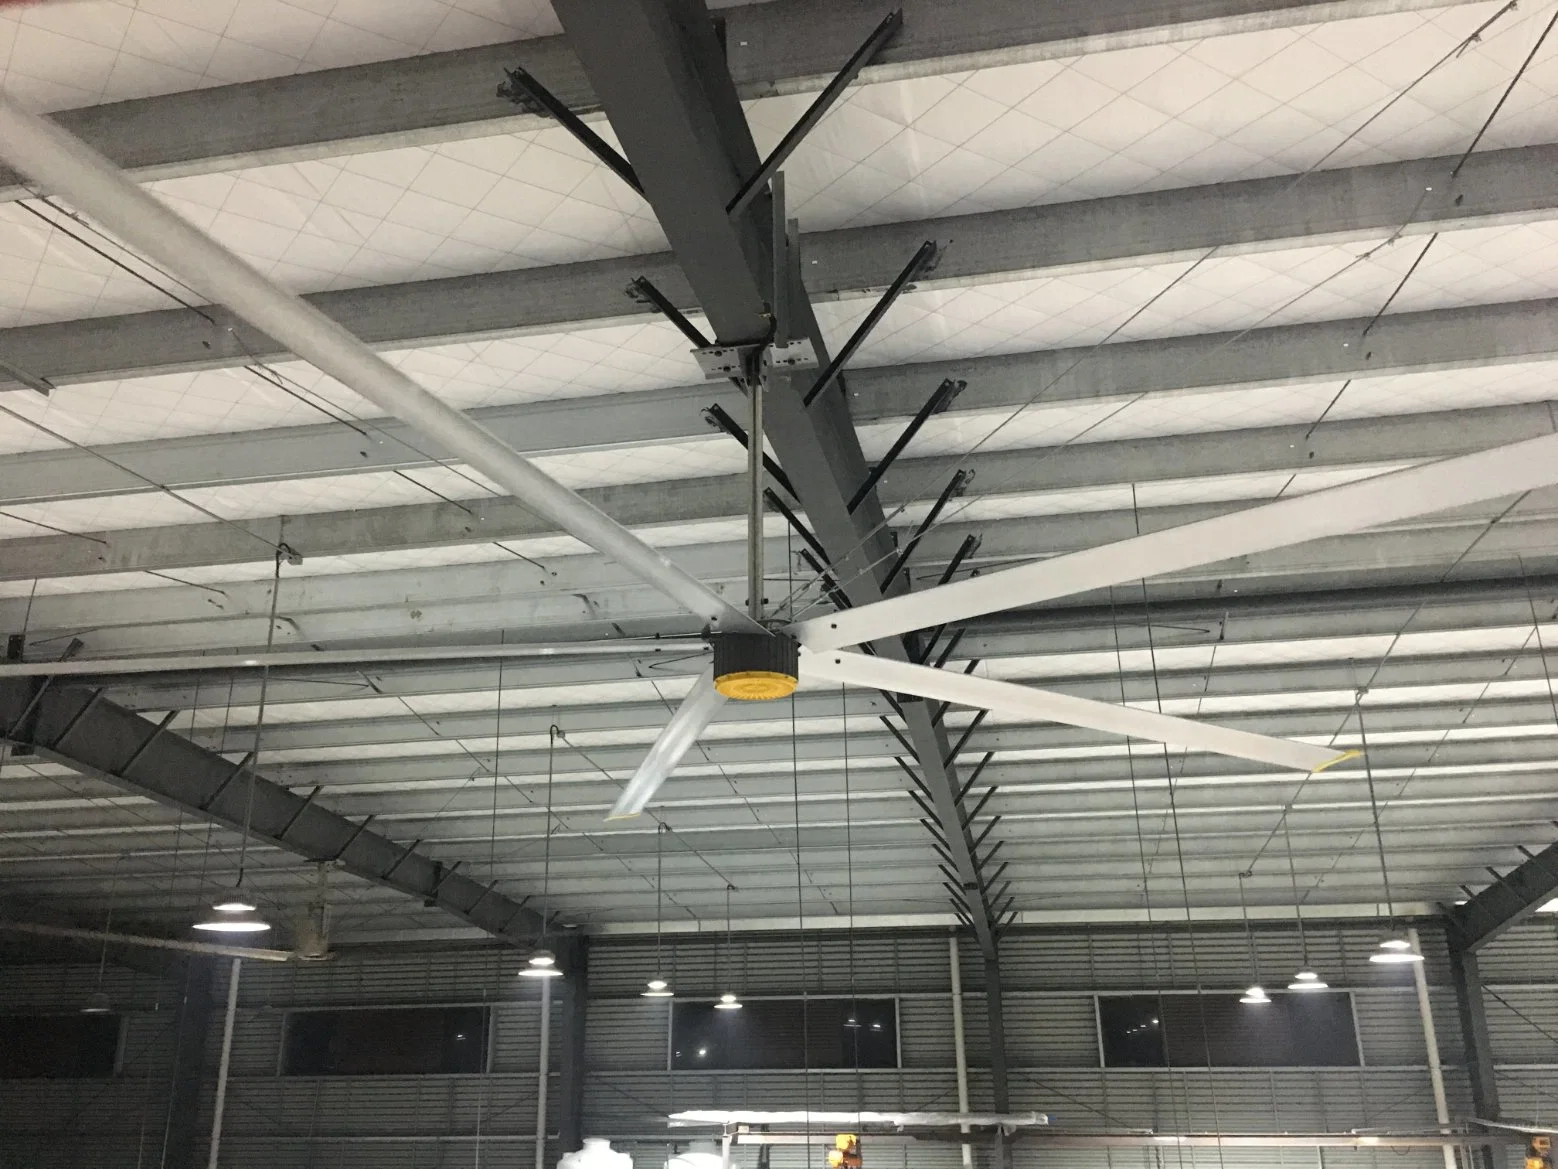 Industrial Hvls Ceiling Fans as Air Blower for Workshop Ventilation and Cooling